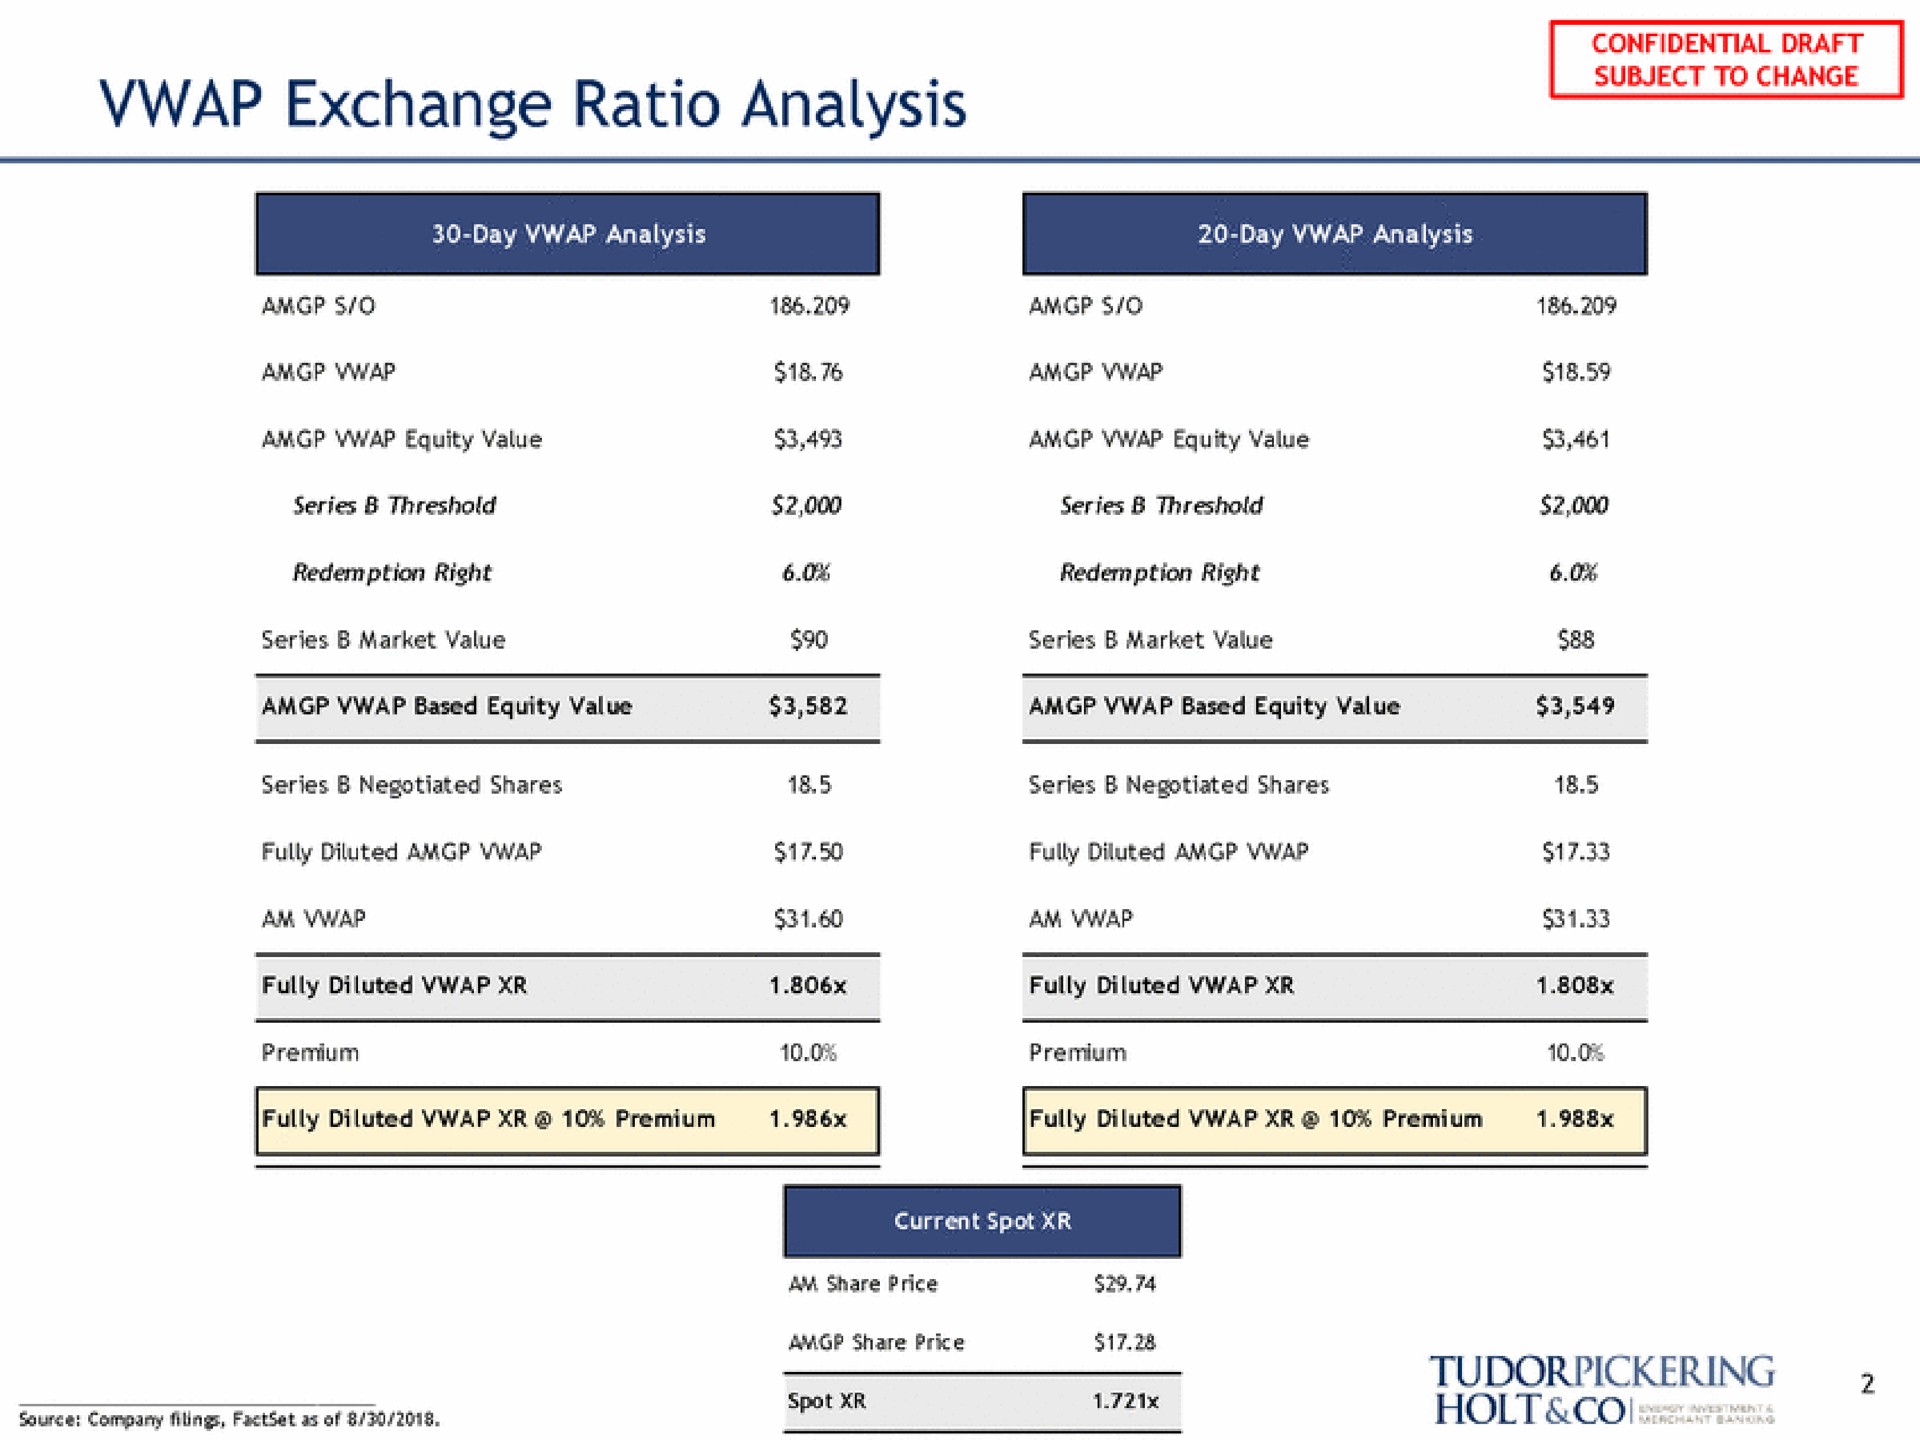 exchange ratio analysis ons company flings as of holt | Tudor, Pickering, Holt & Co